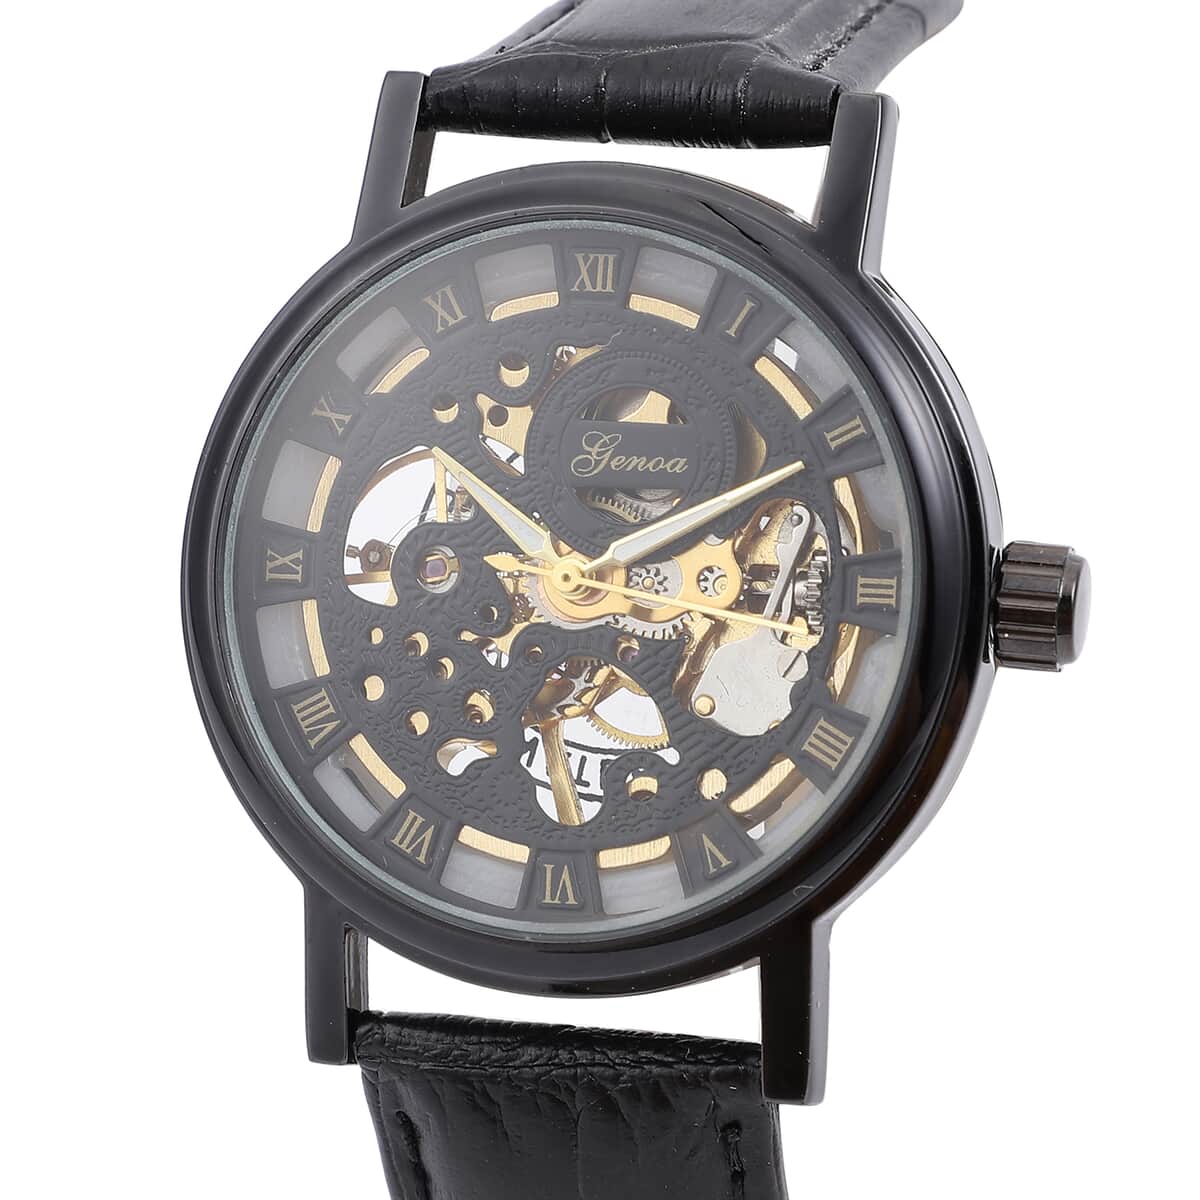 Genoa Automatic Mechanical Movement Hollowed Out Watch in Black with Black Leather Band image number 3